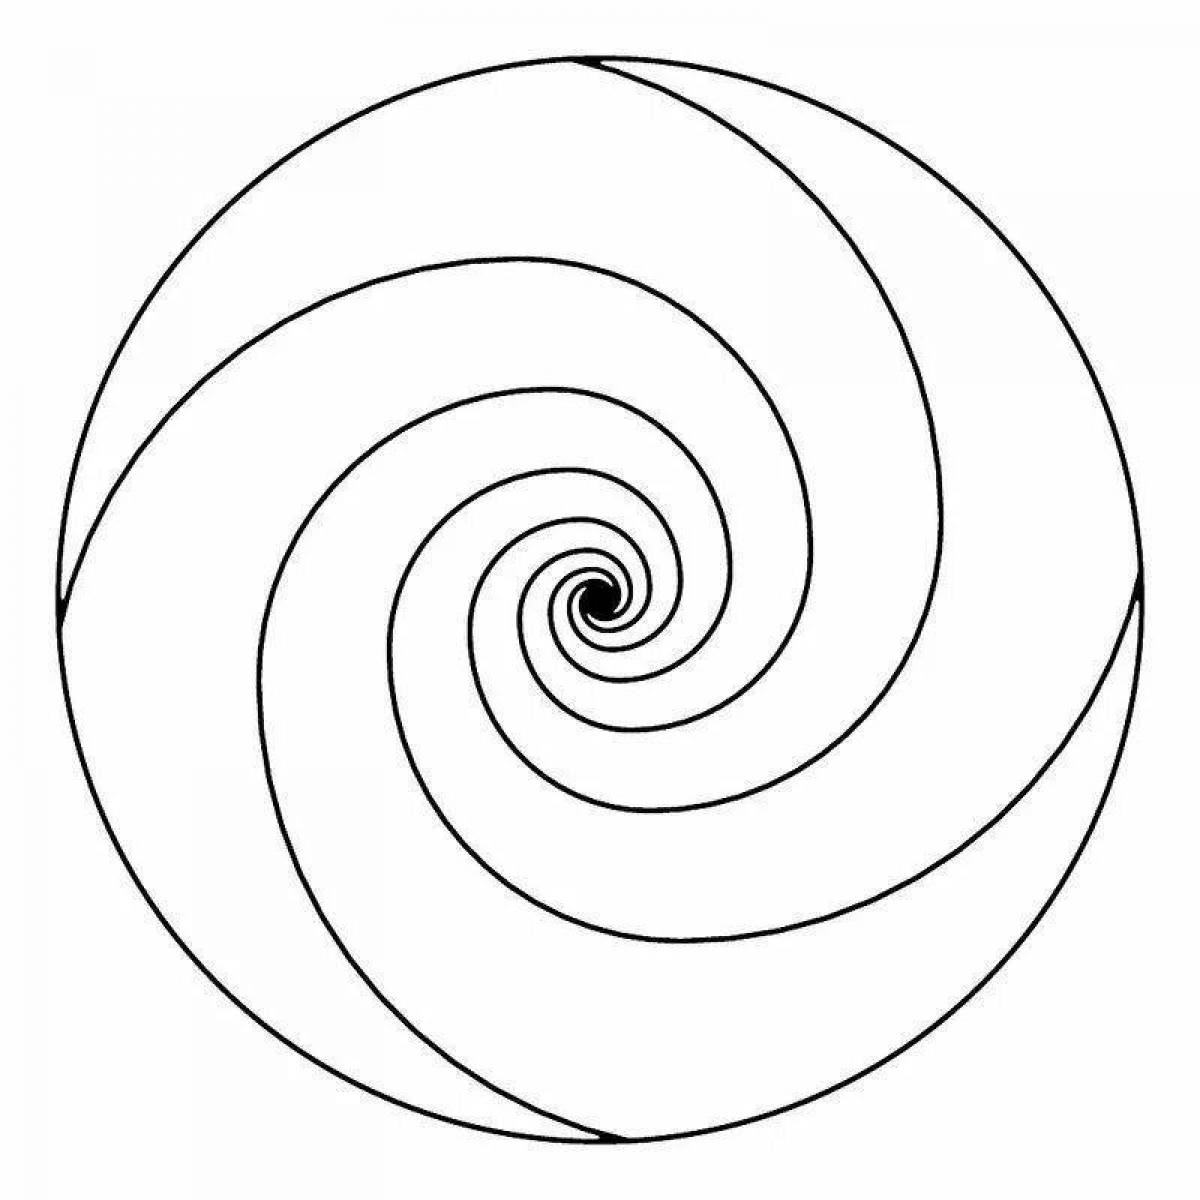 Brilliantly shaded spiral coloring page